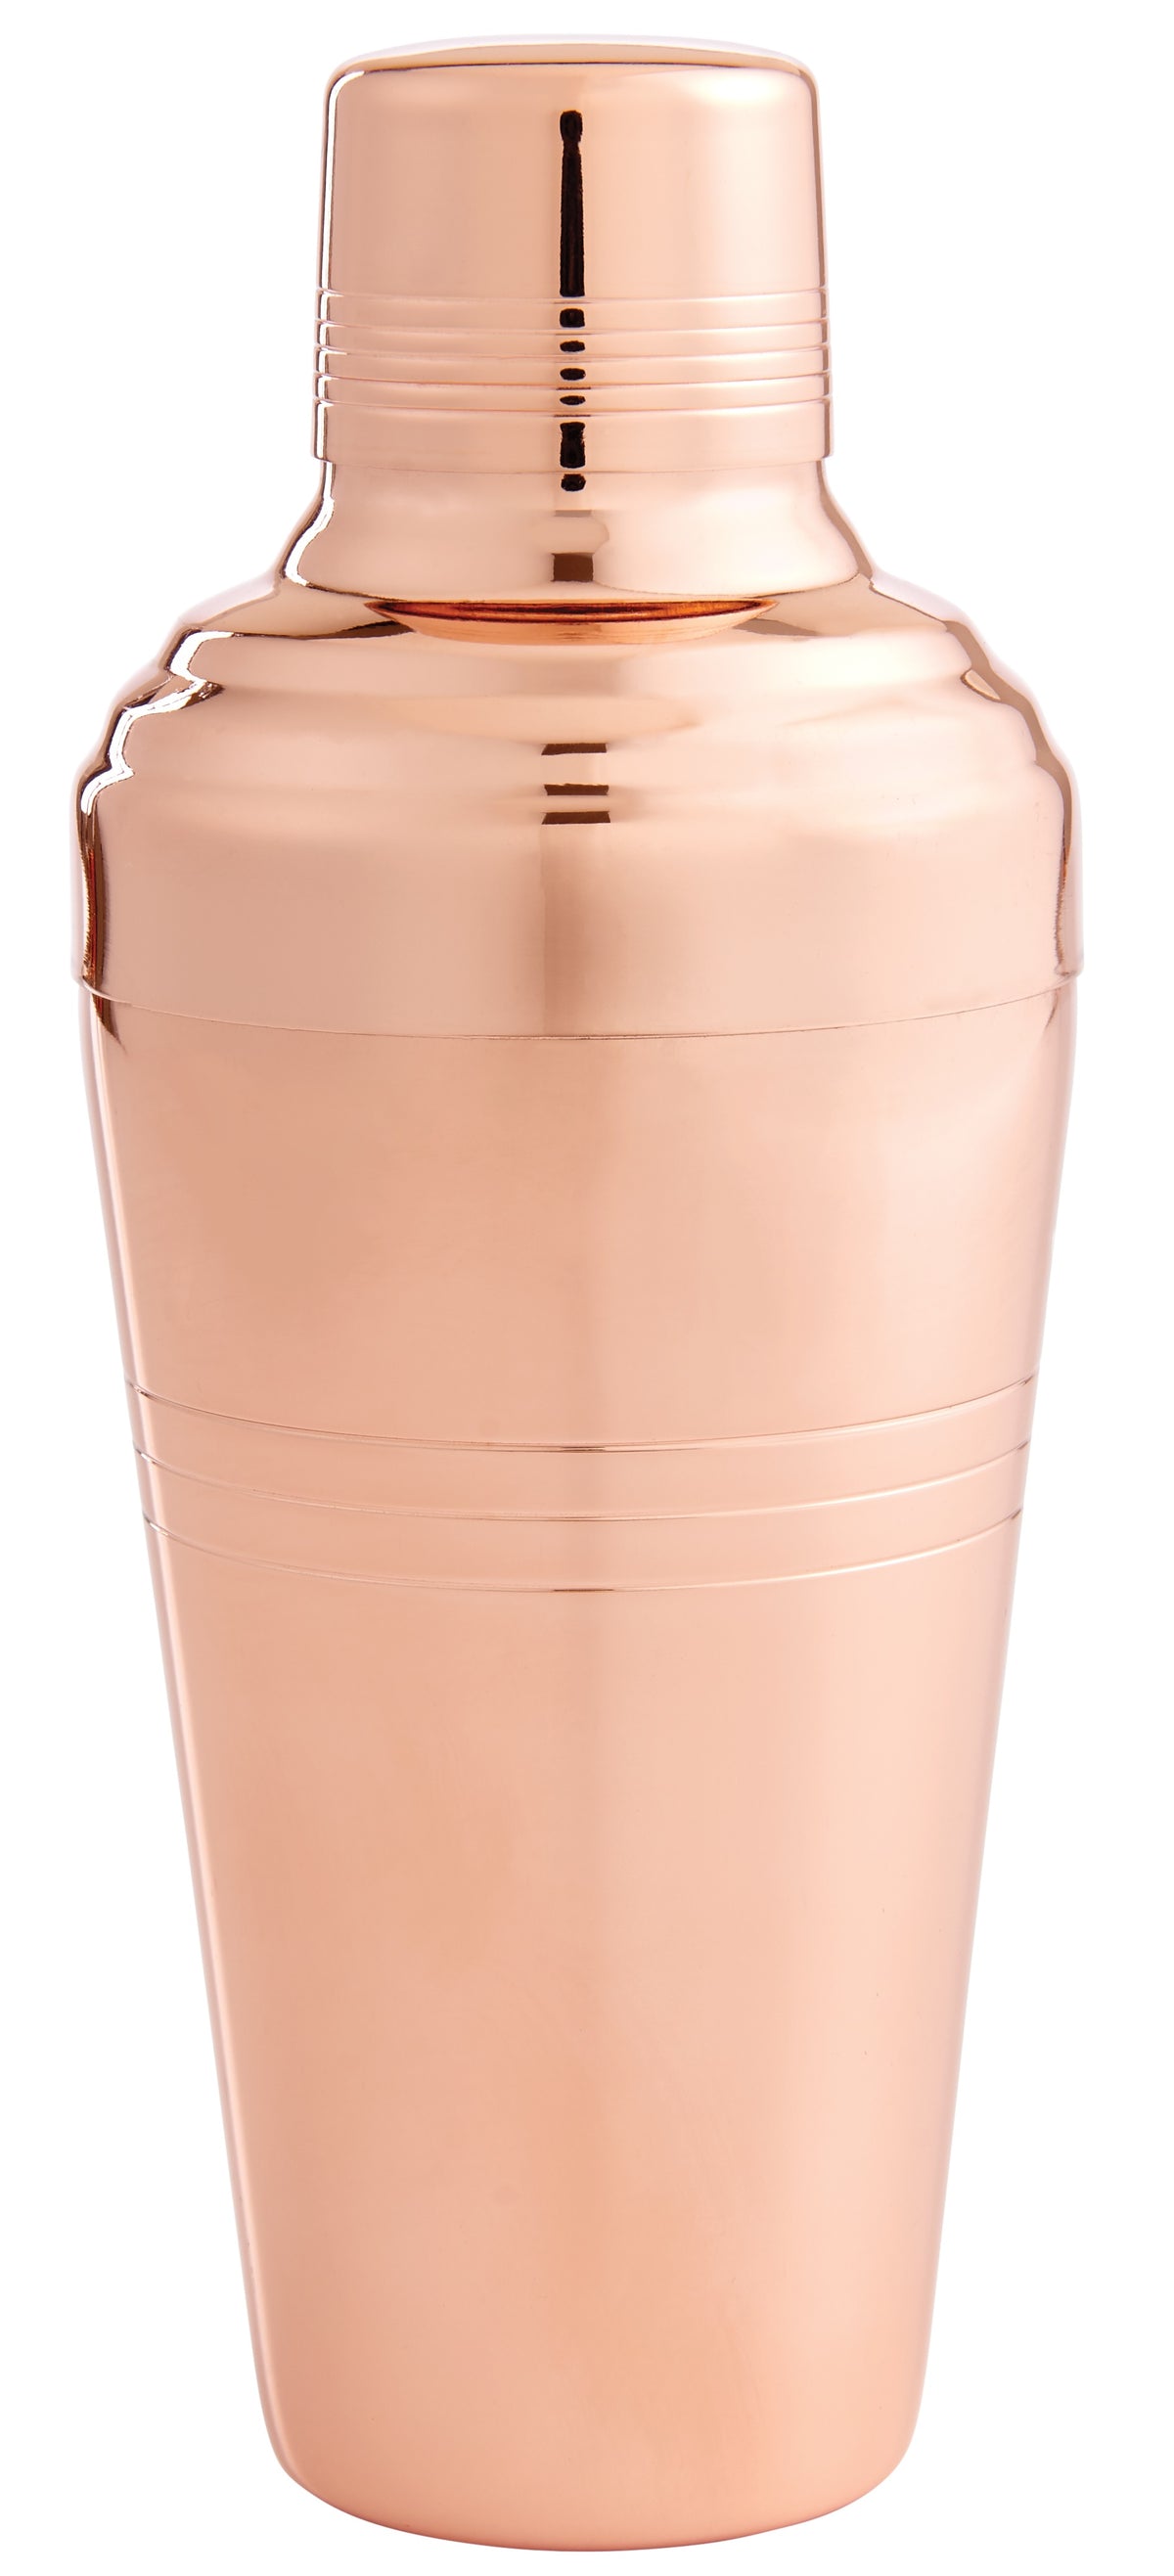 Harold Import 48034 Cocktail Shaker, Copper Plated